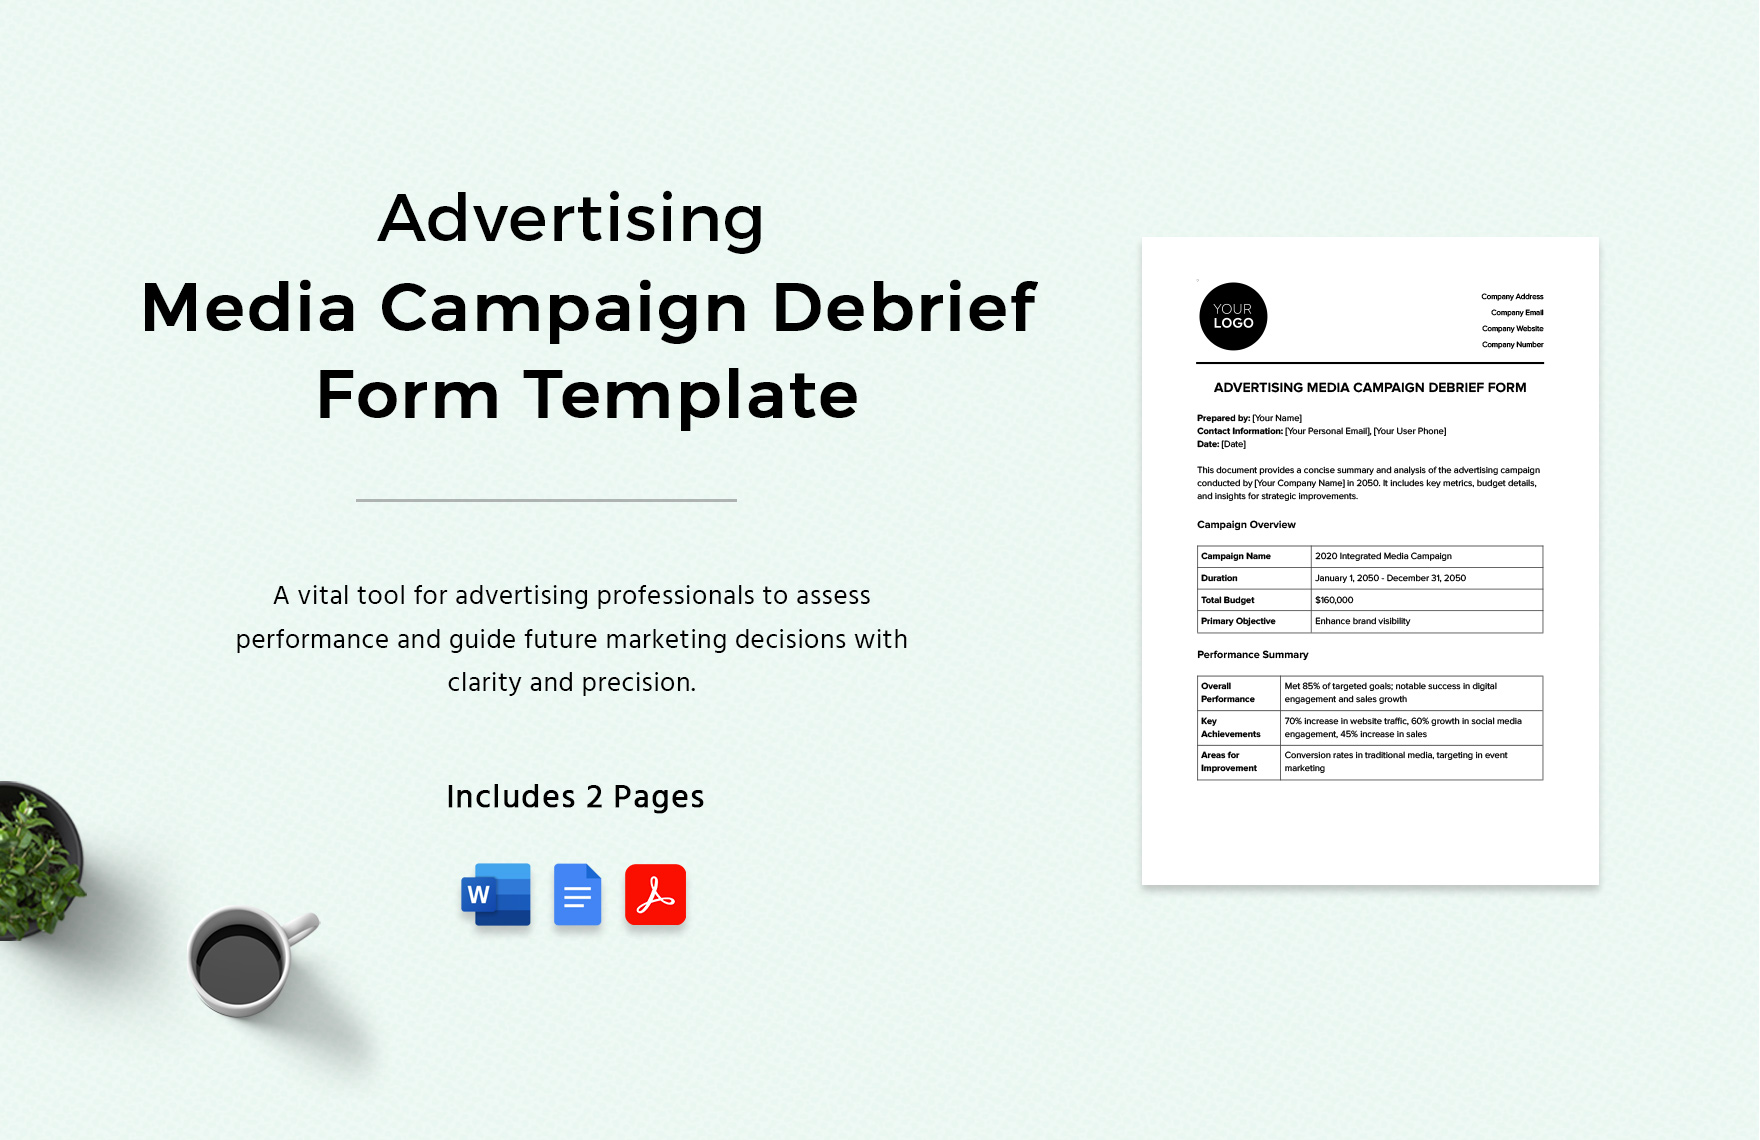 Advertising Media Campaign Debrief Form Template in Word, Google Docs, PDF